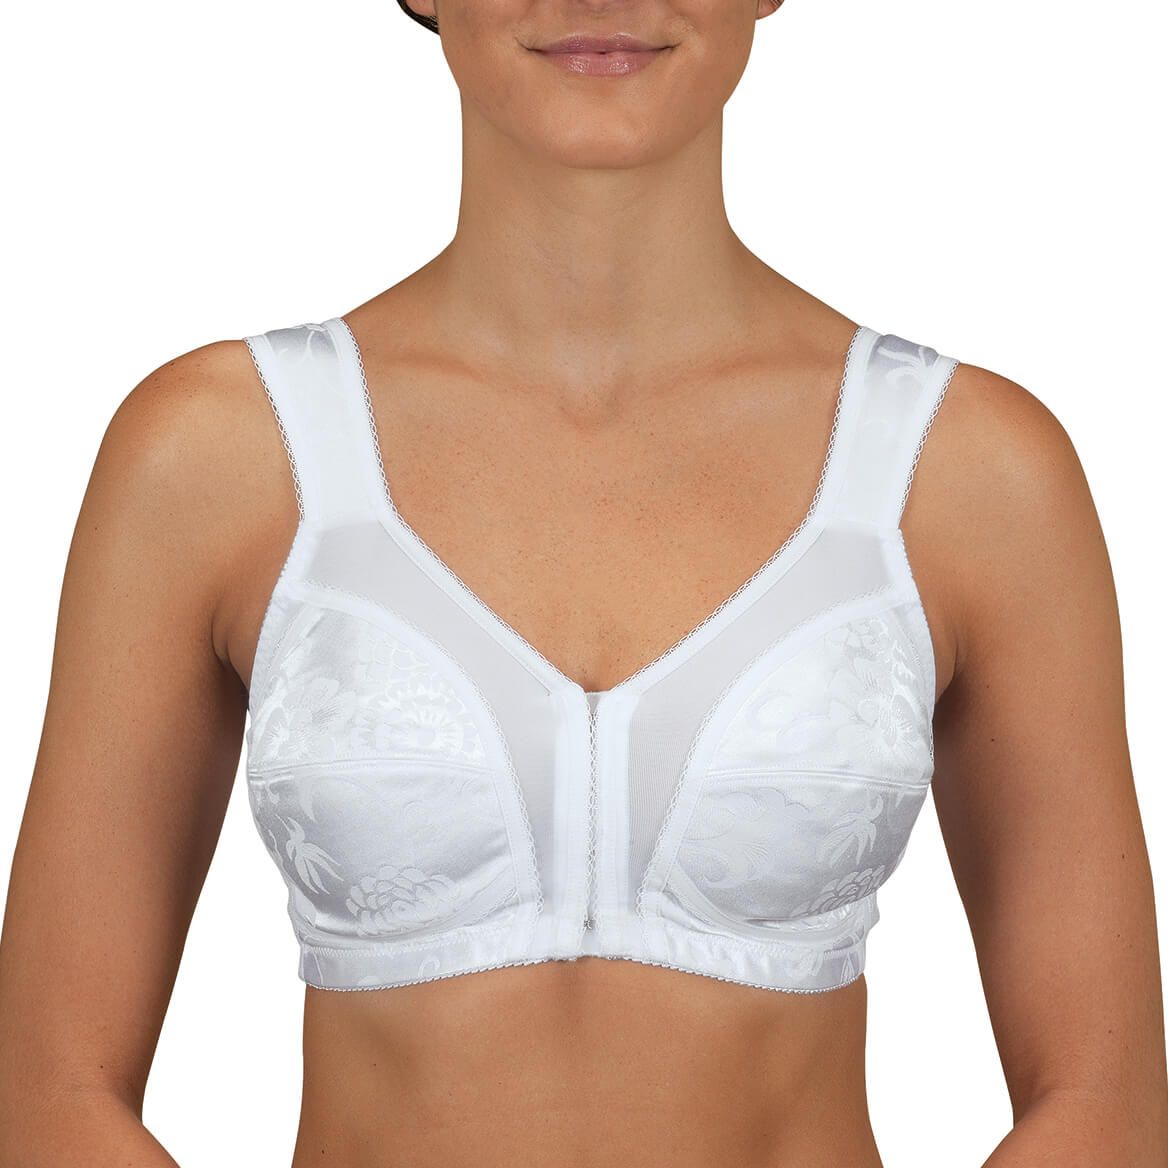 4695 - Playtex 18 Hour Front Close with Flex Back Bra